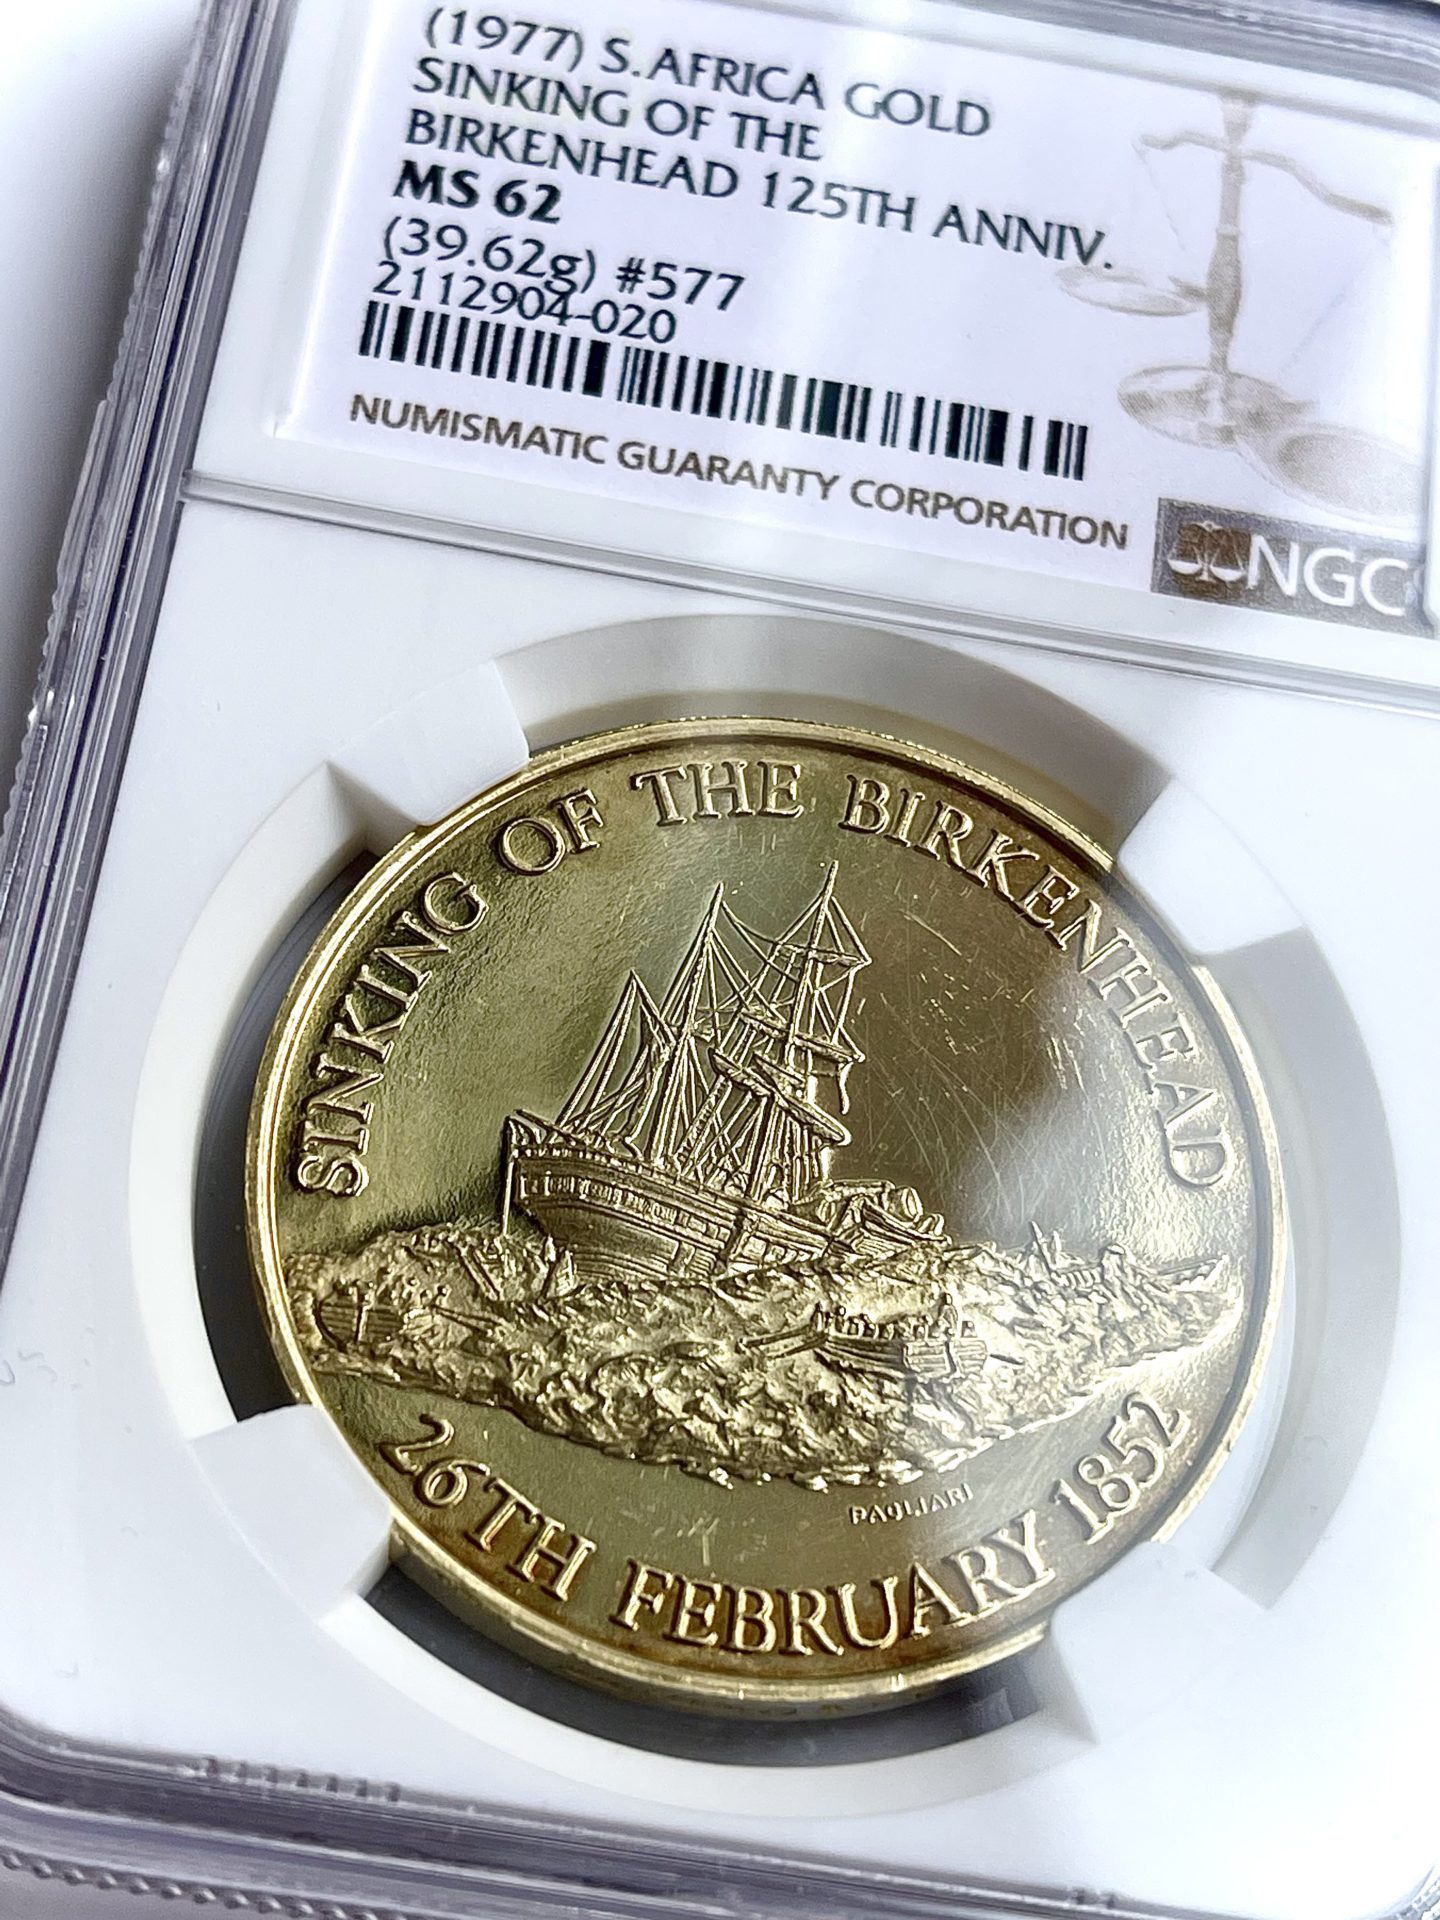 South Africa 1977 125 years sinking of the birkenhead NGC MS 62